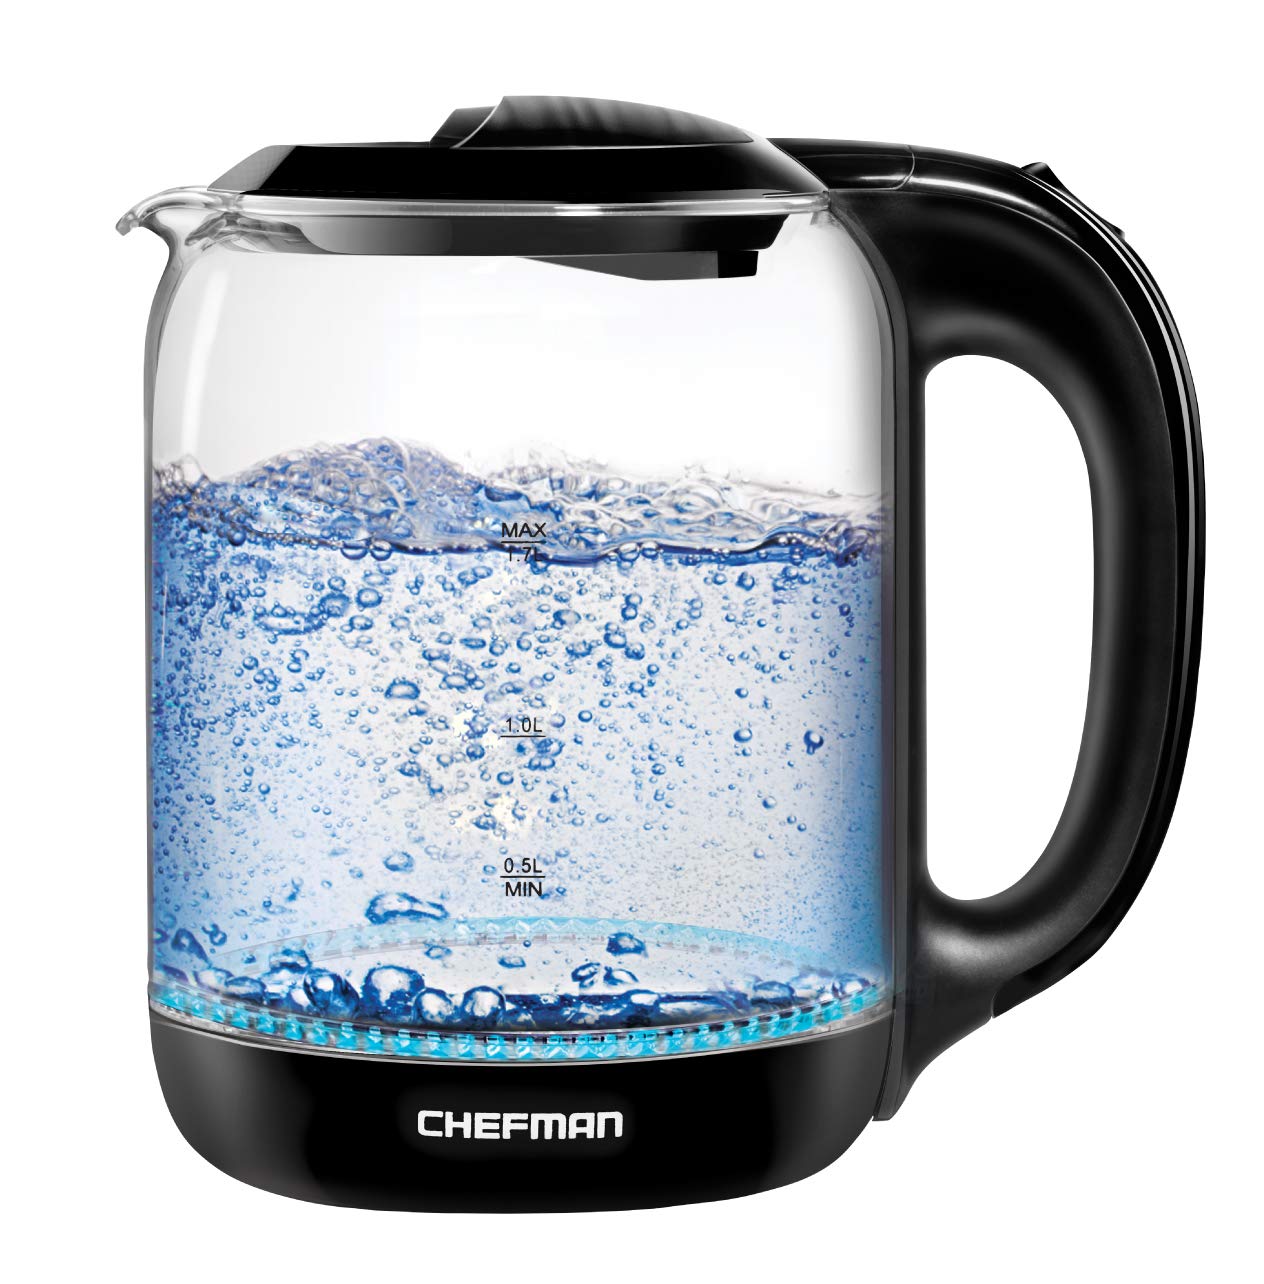 1.7L Chefman Electric Glass Tea Kettle w/ Auto Shut-Off (7 Cups) $14 + Free Shipping w/ Prime or on $35+